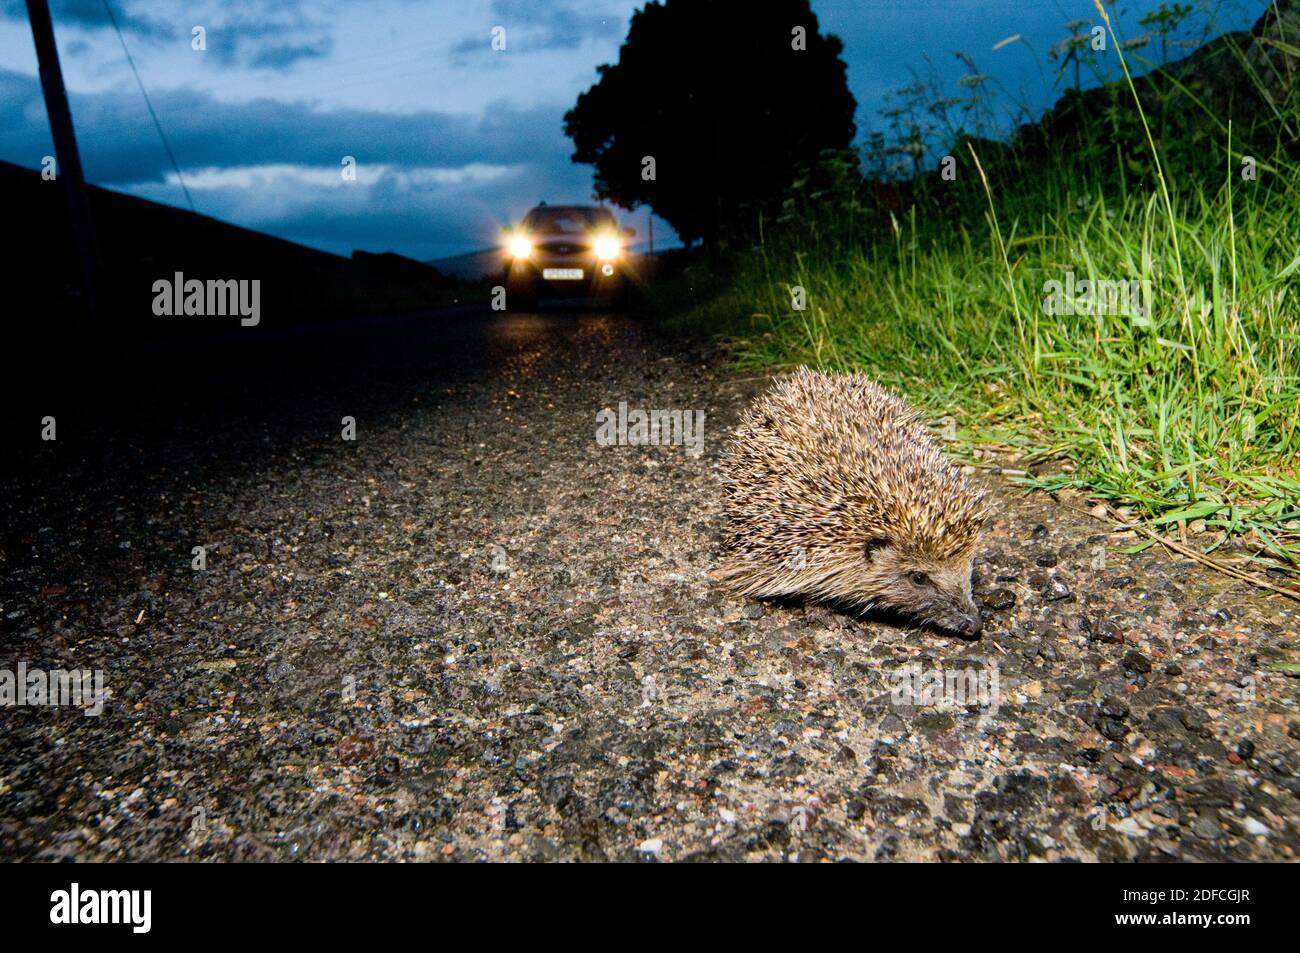 Hedgehog (Erinaceus europaeus) in danger of being run over by a car. Stock Photo